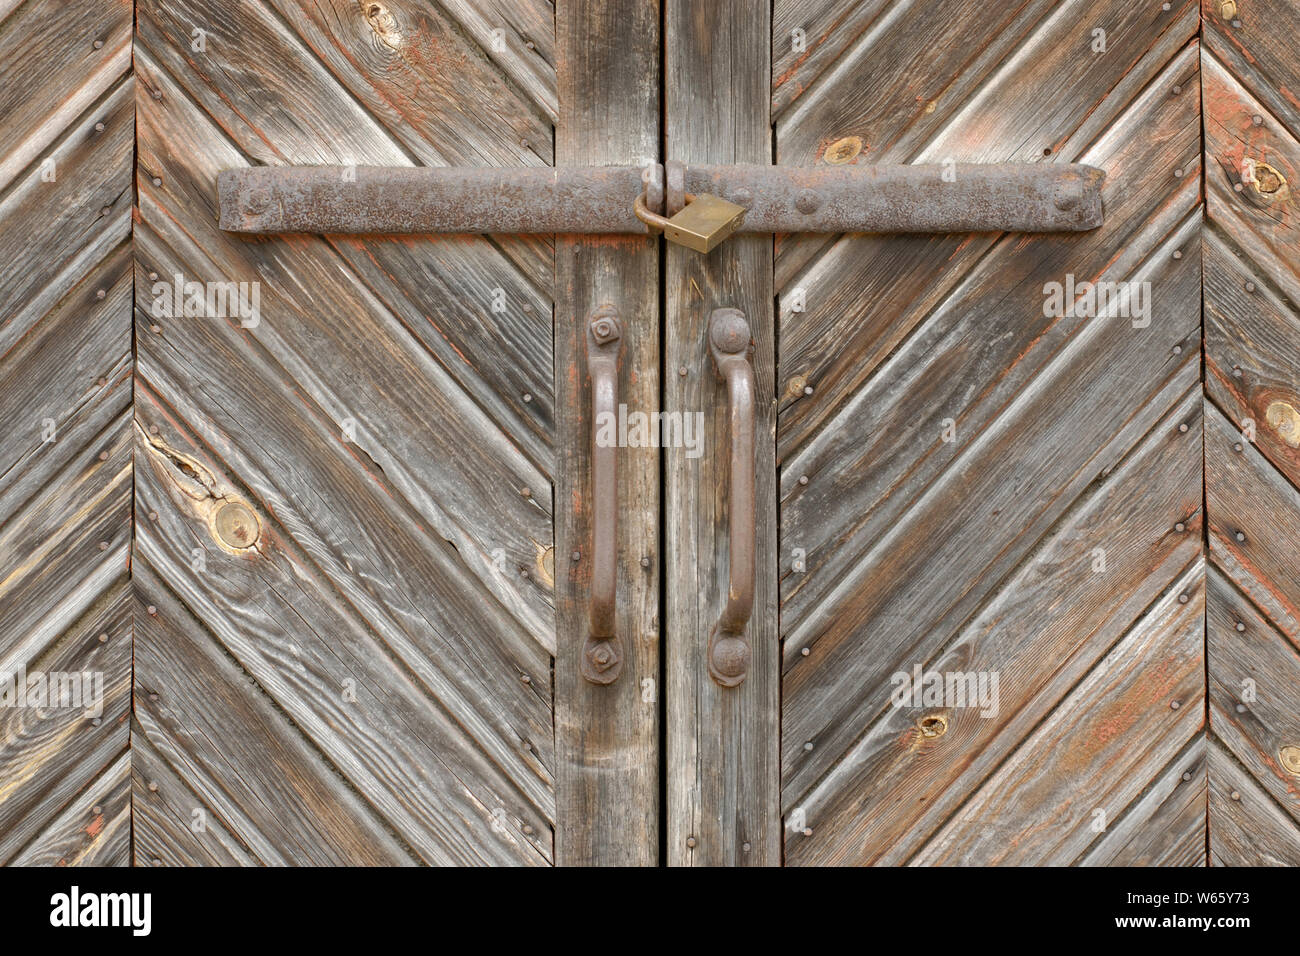 old wooden door with lock and bolt Stock Photo